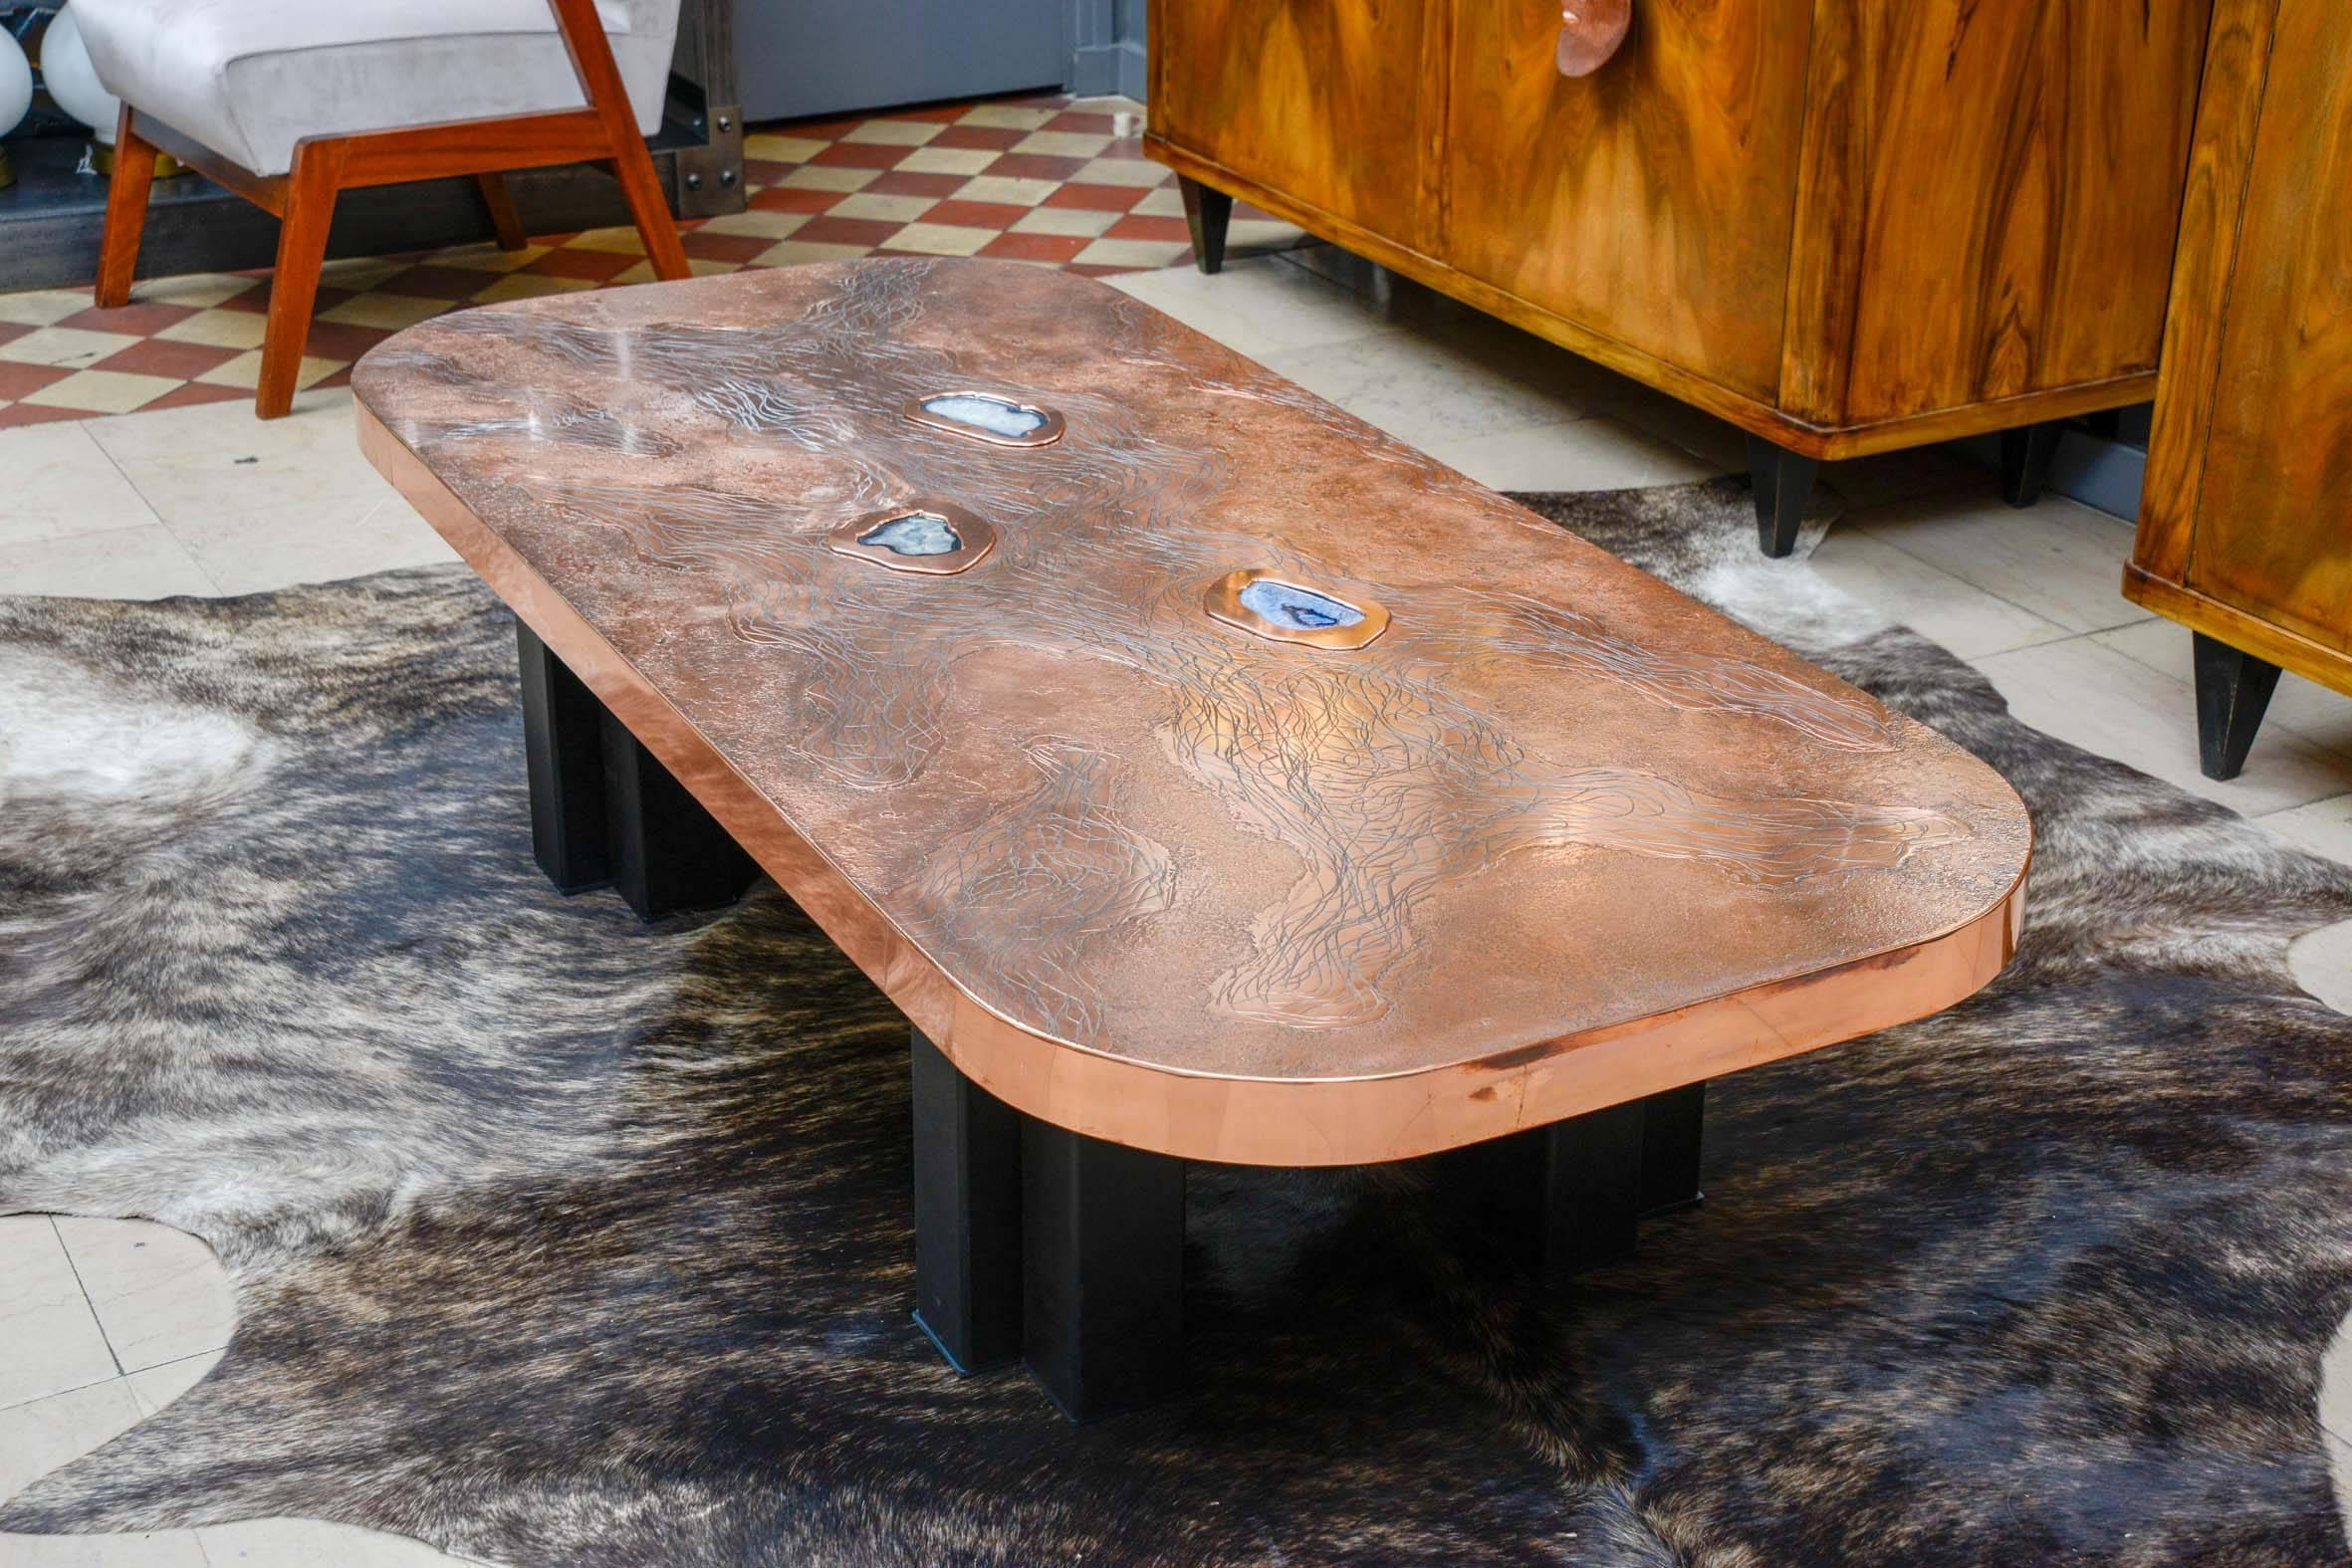 Original low table with three blue agate stones inlaid on the engraved copper top, black metal legs, signed and dated.